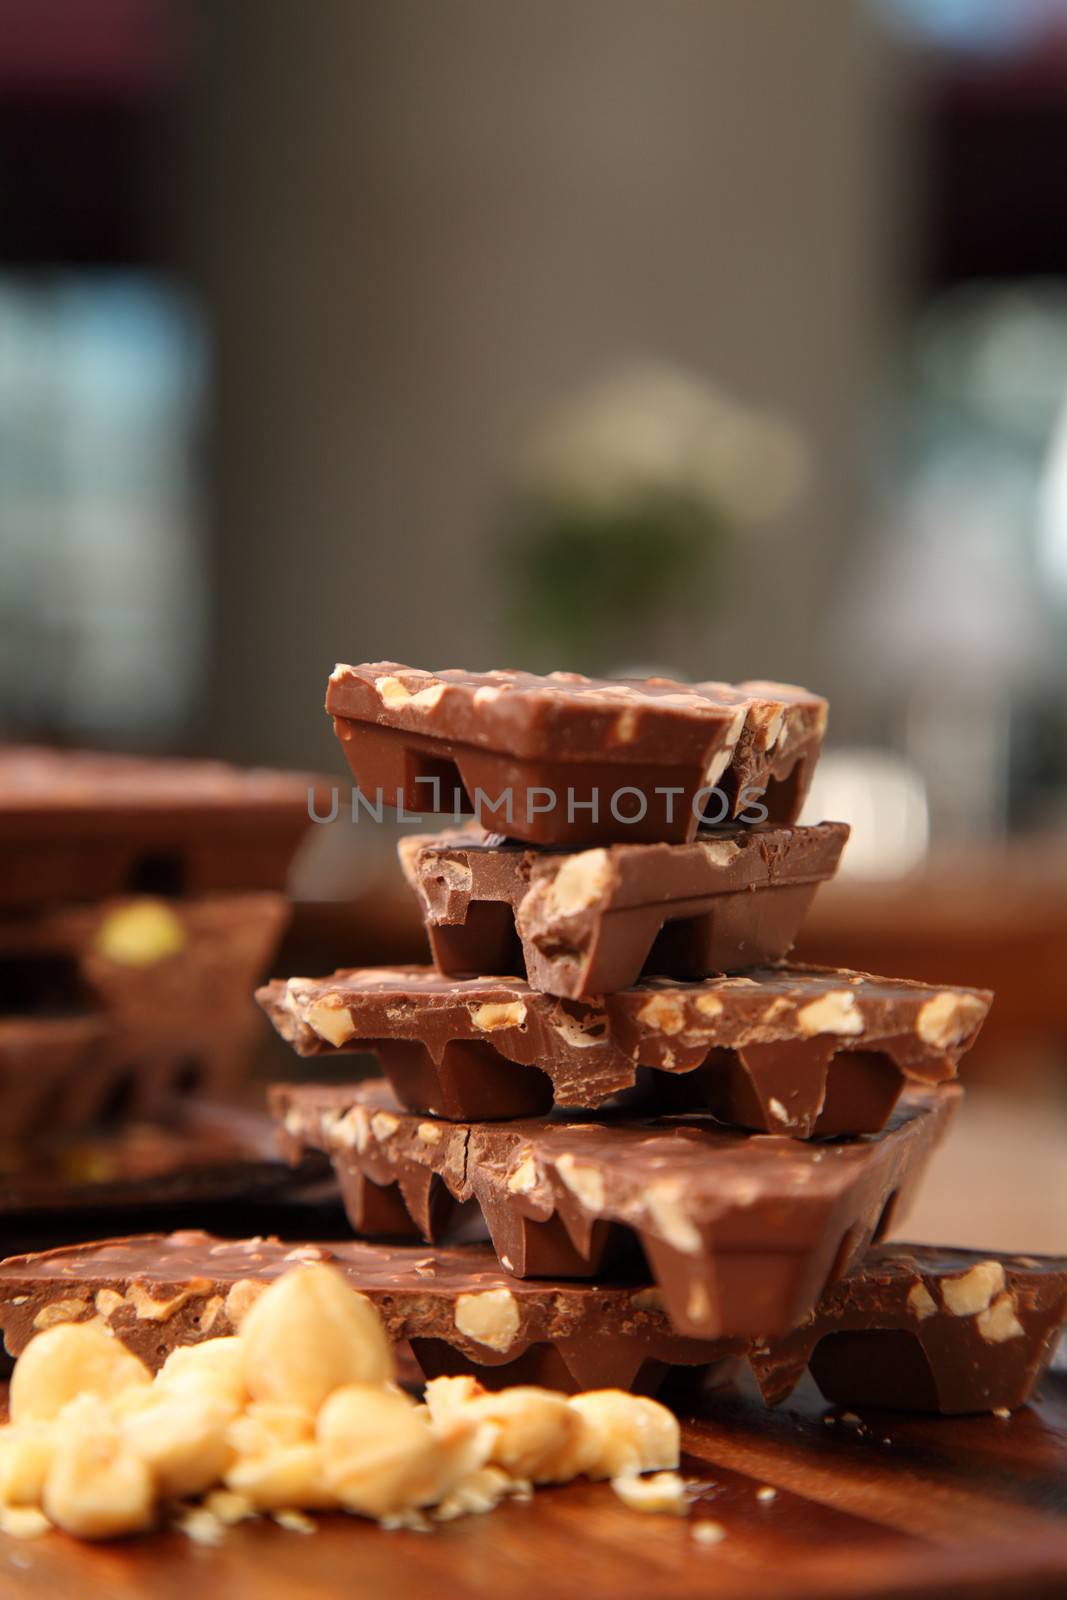 Chocolate and nuts by shamtor